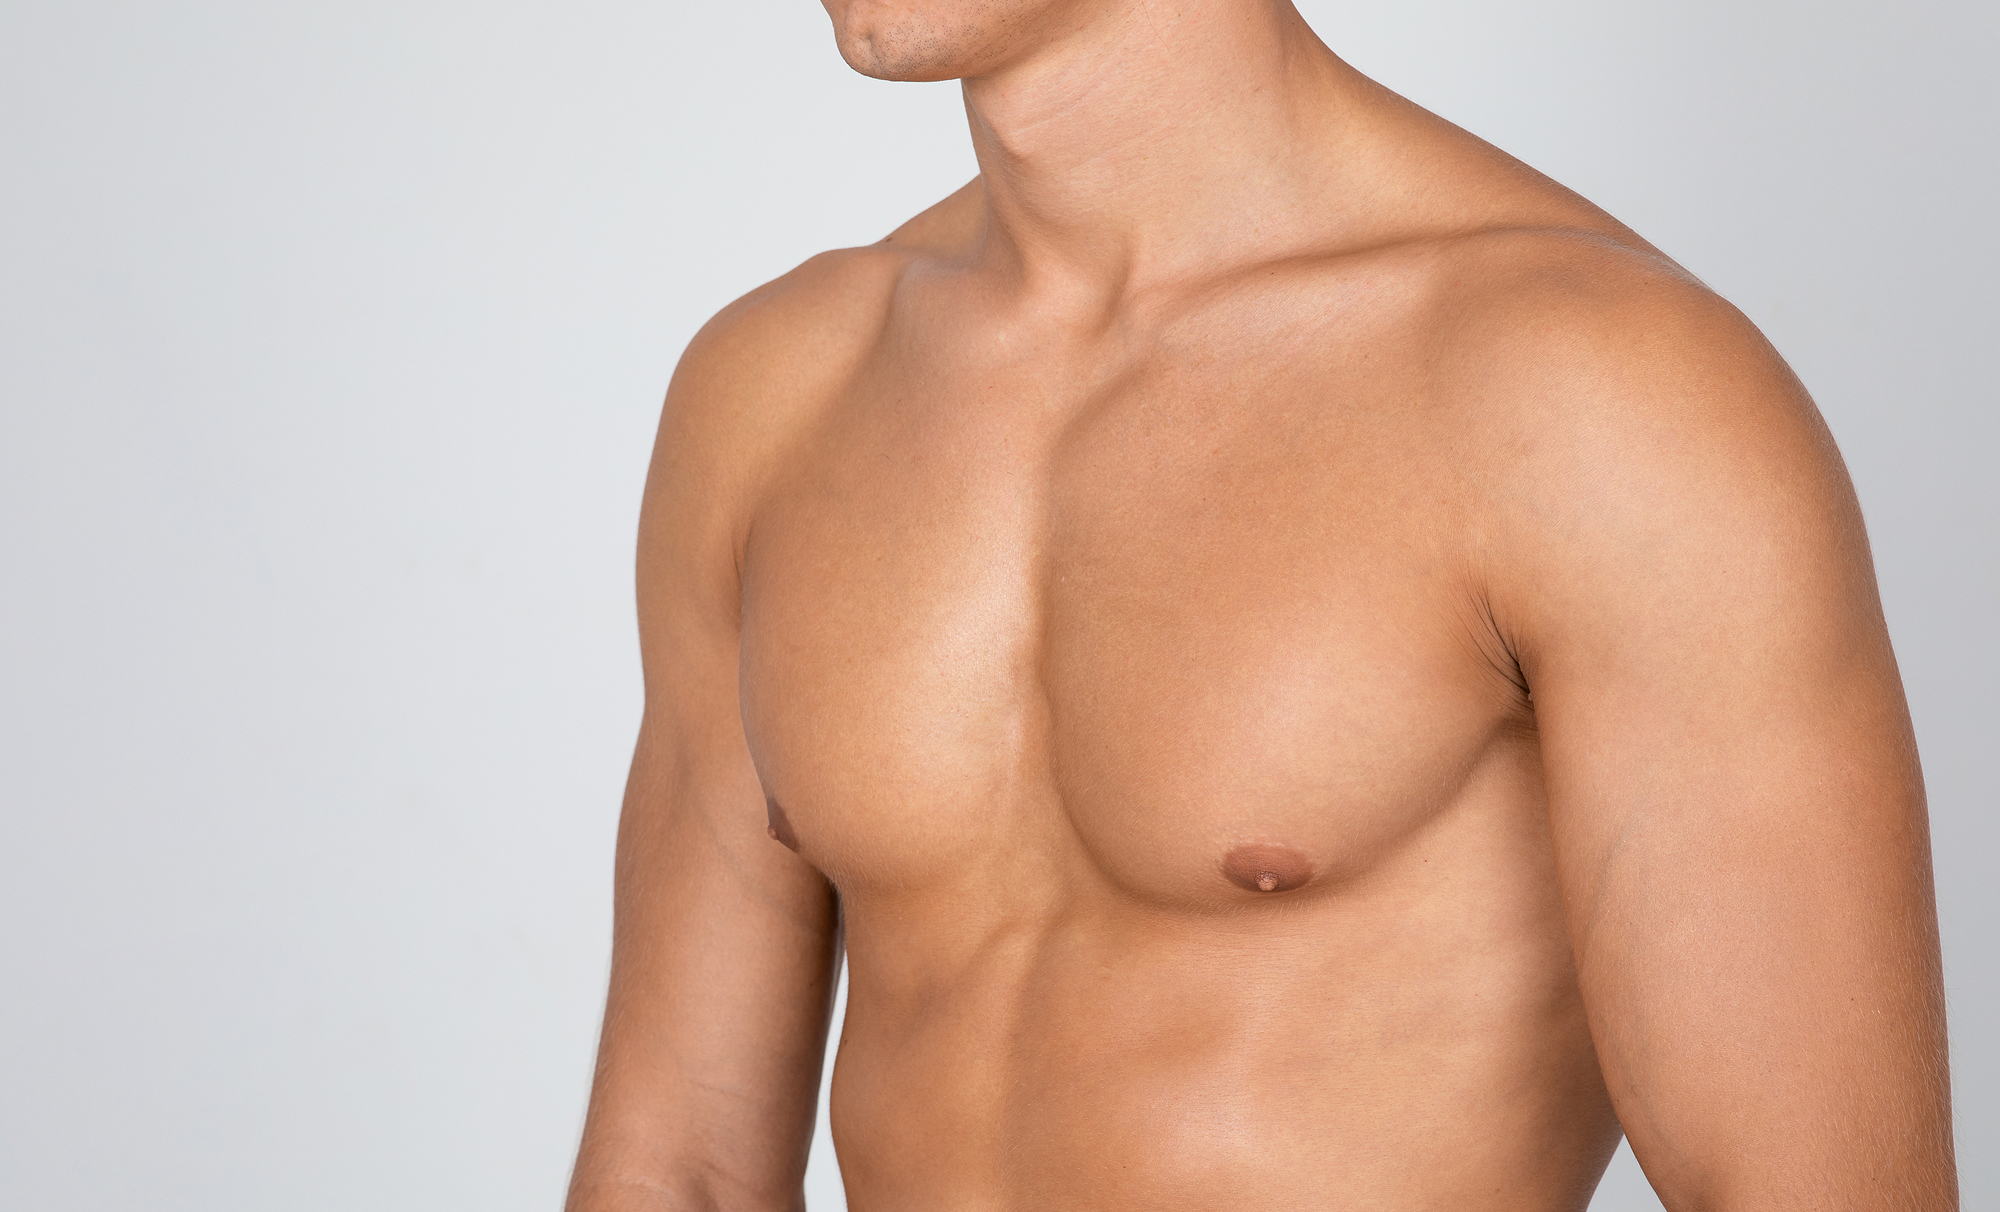 A shirtless man before male boobs removal surgery.